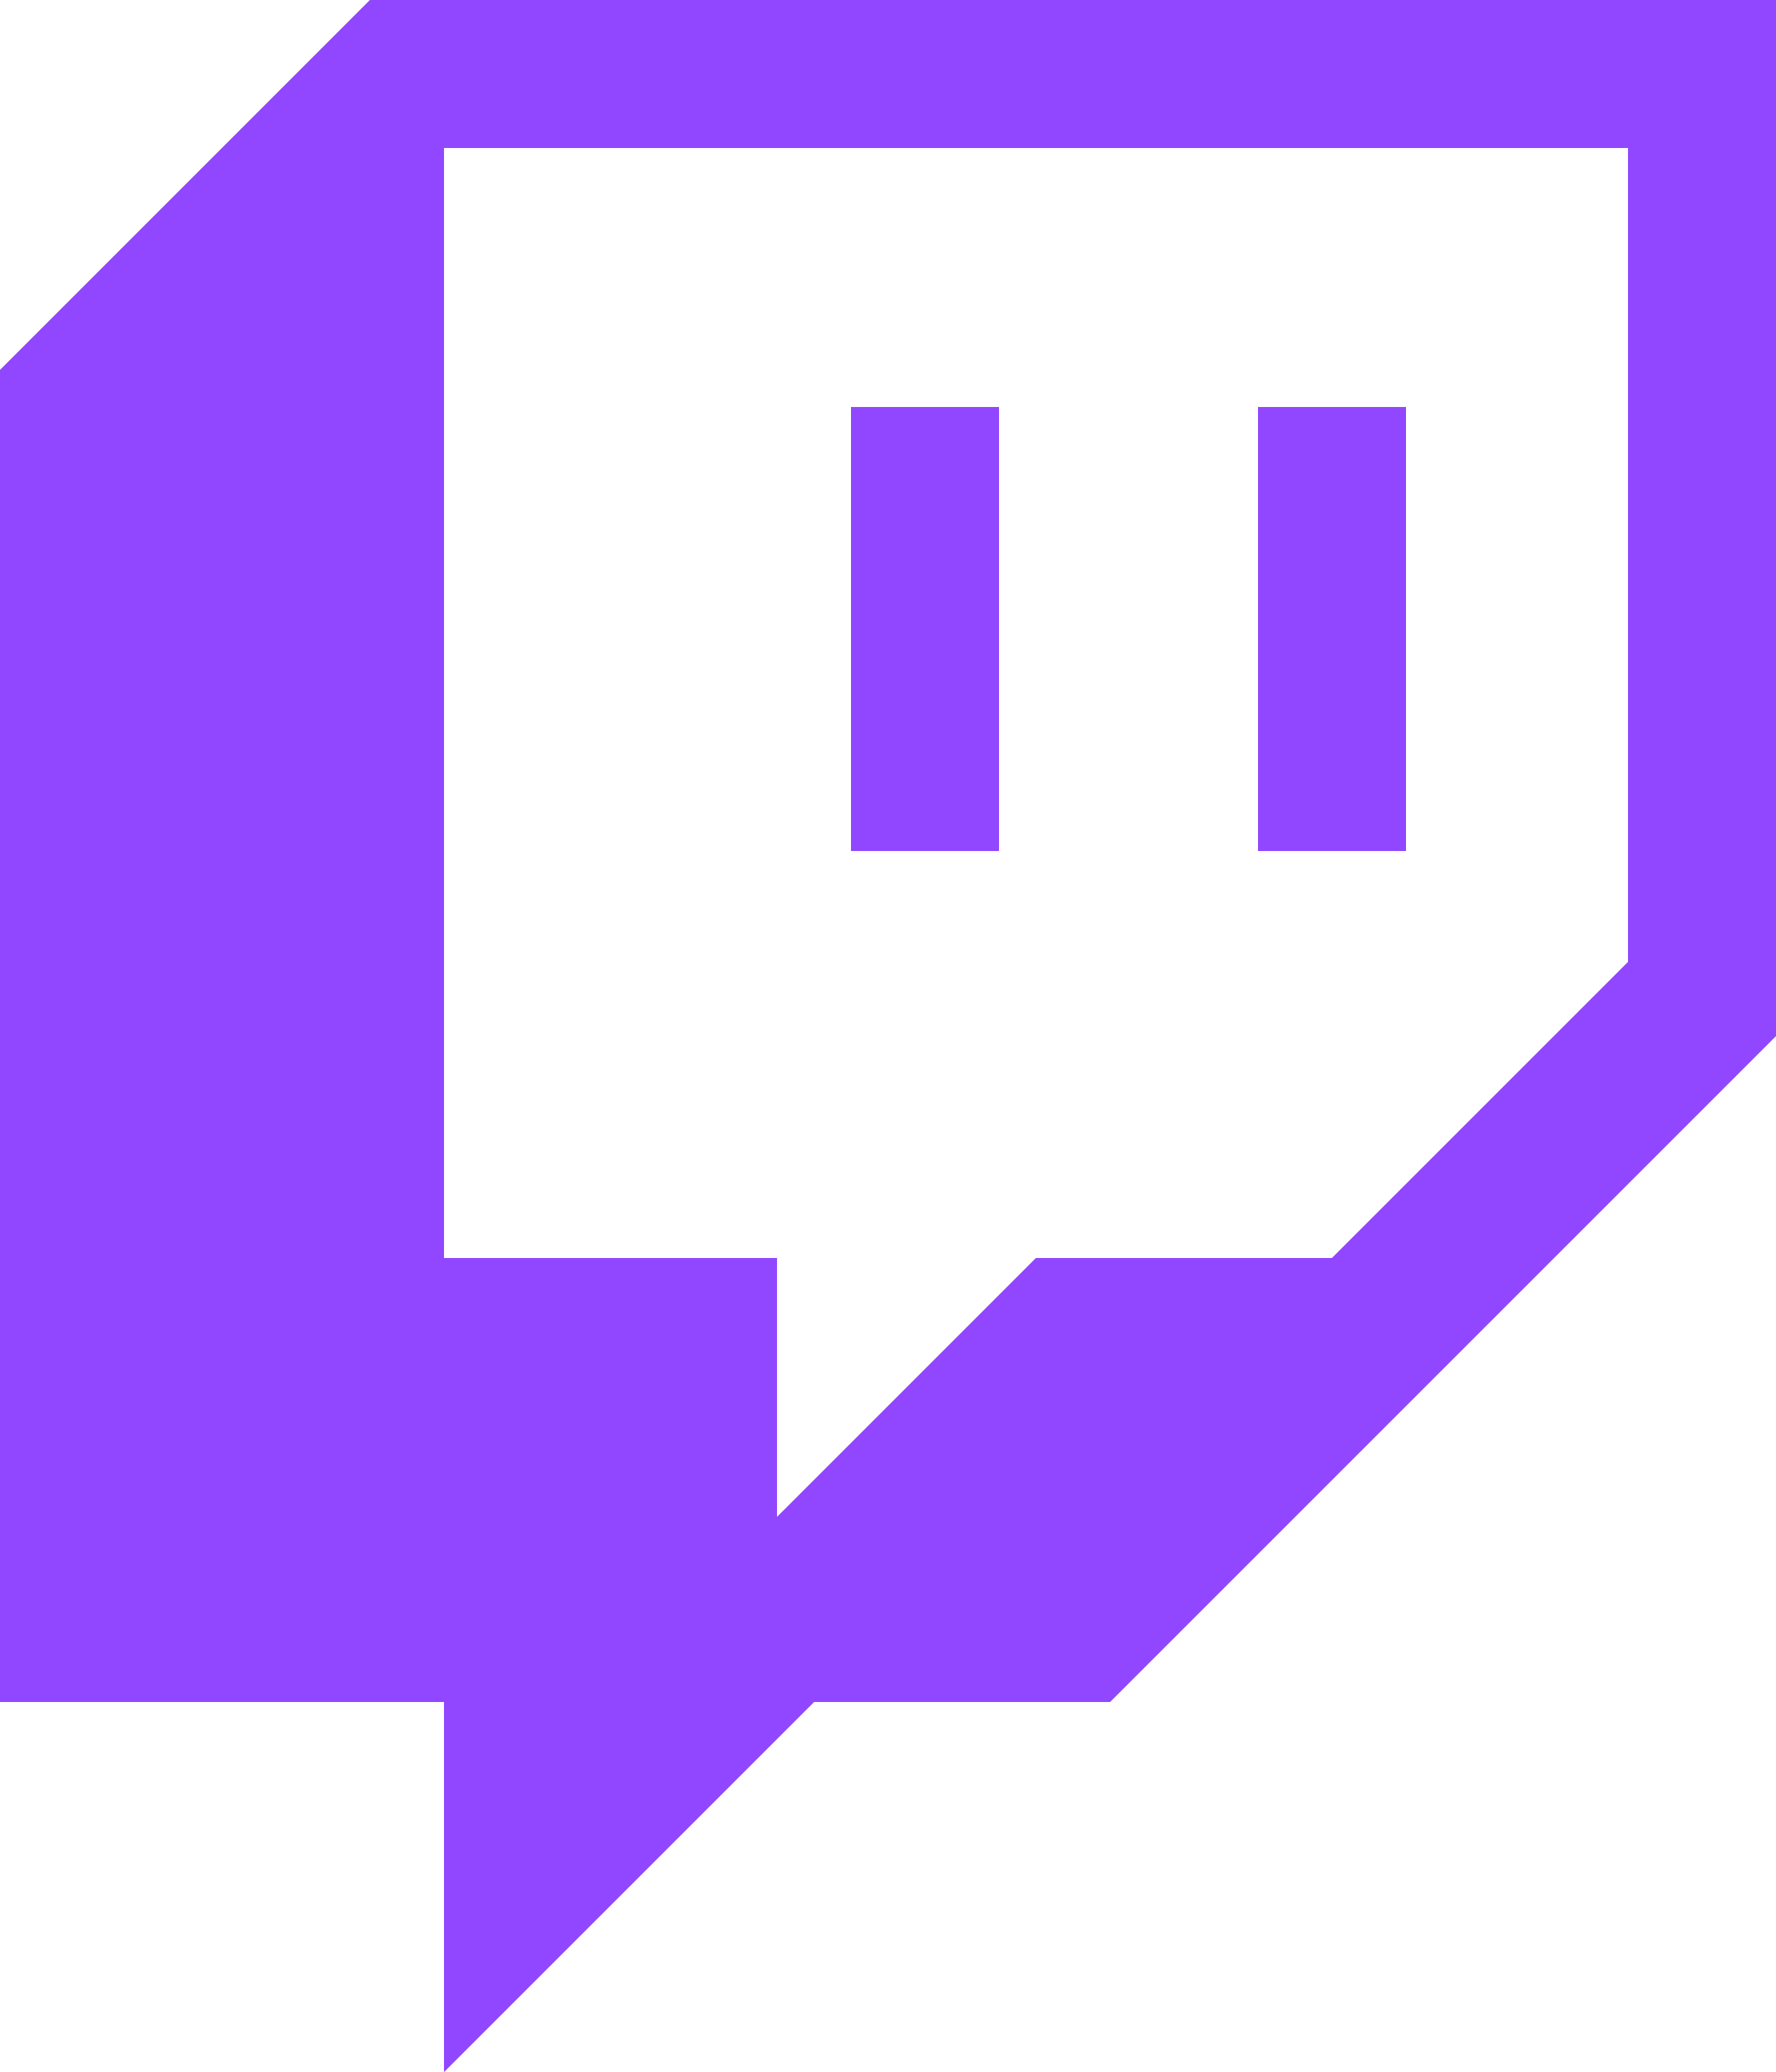 Follow us on Twitch for the live streams!